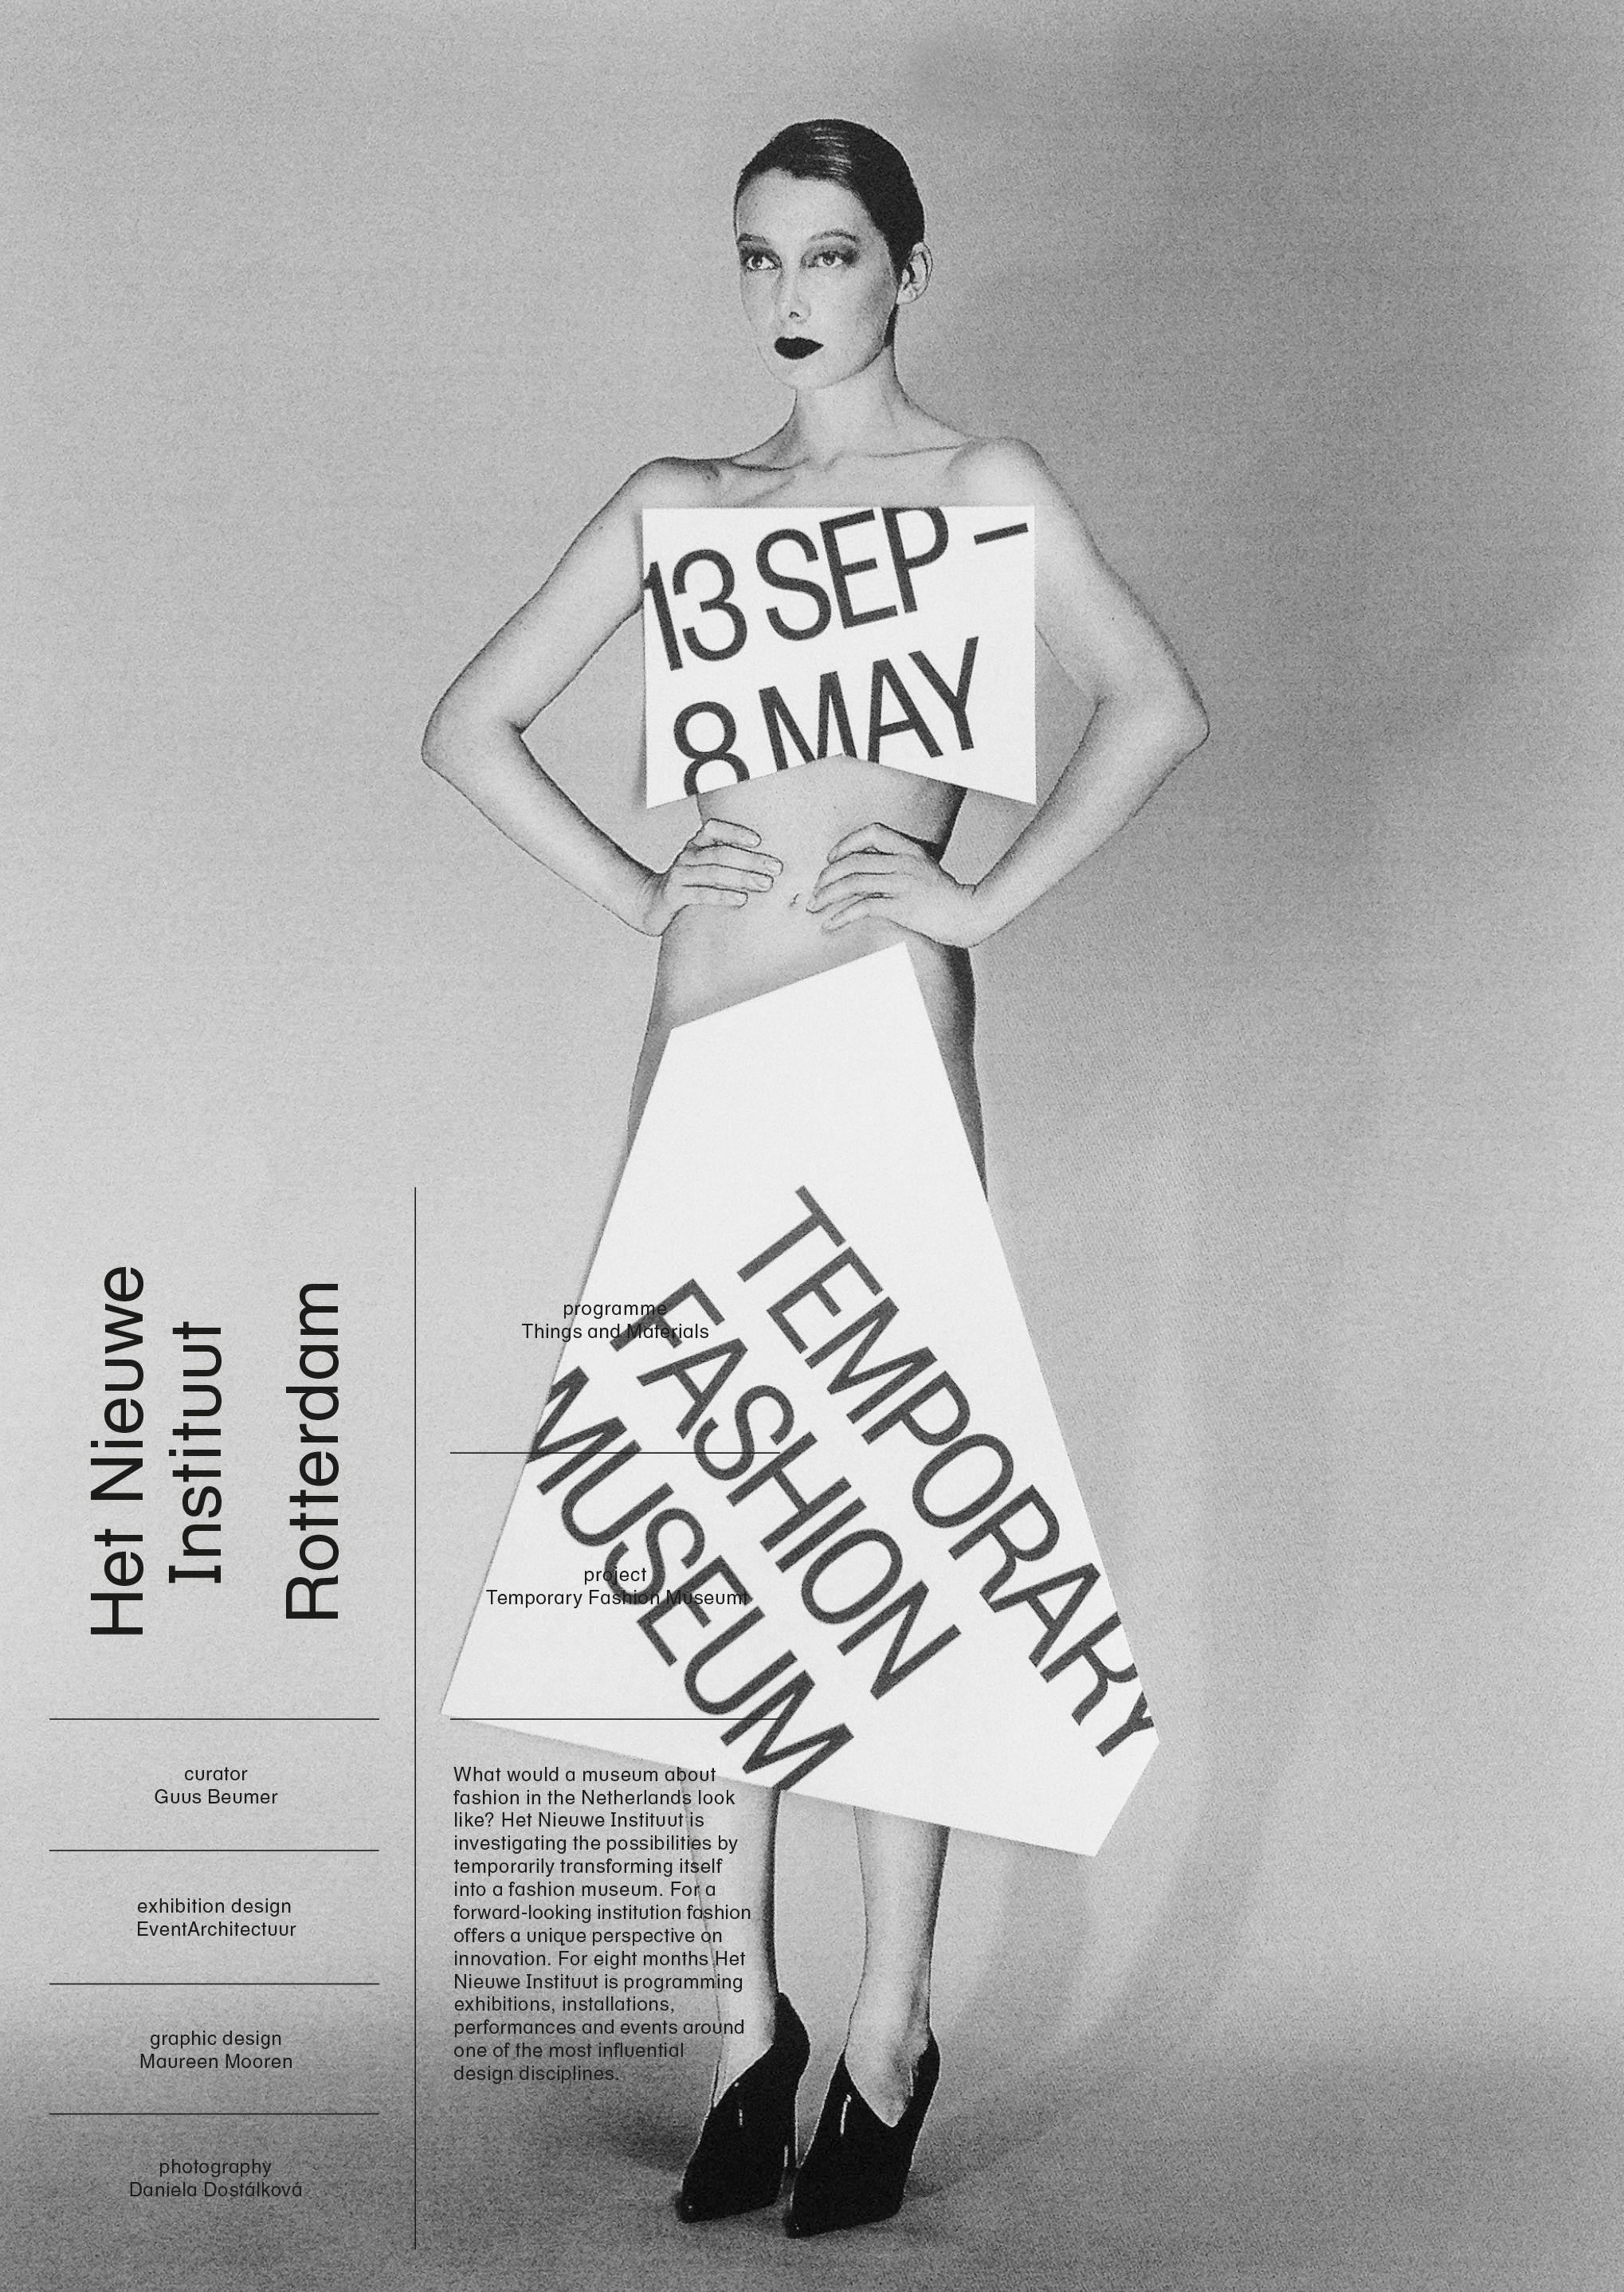 Temporary Fashion Museum campaign. Graphic design by Maureen Mooren. 